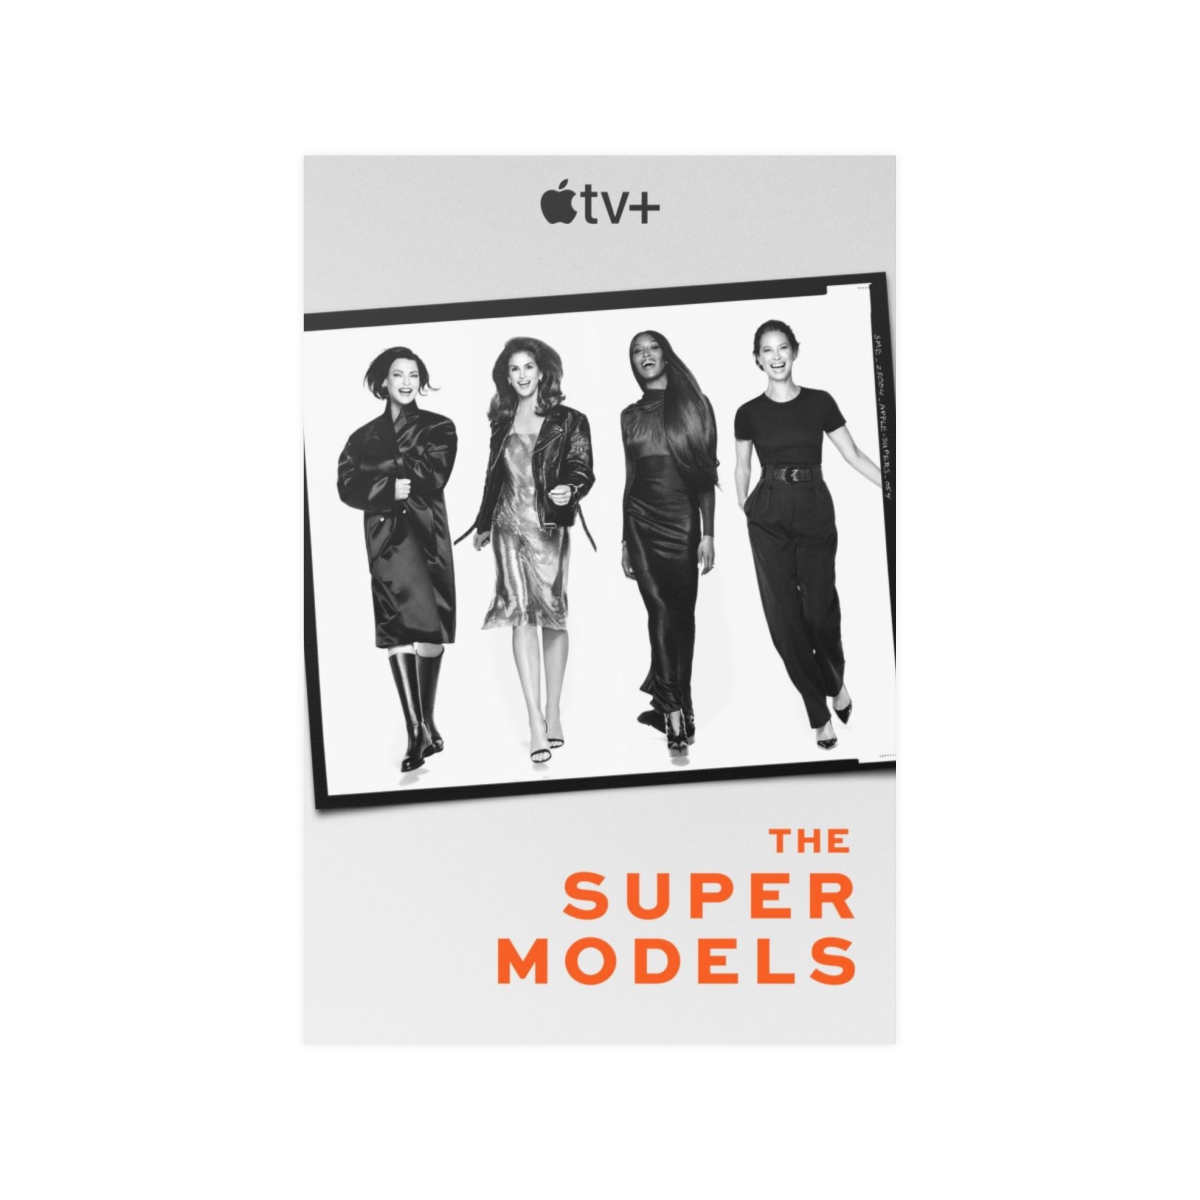 The Supermodels 2023 documentary HQ satin paper poster has arrived in various sizes.

hqsatinpaperposters.printify.me/product/244183…

#thesupermodels #90ssupermodels #lindaevangelista #christyturlington #naomicampbell #cindydrawford